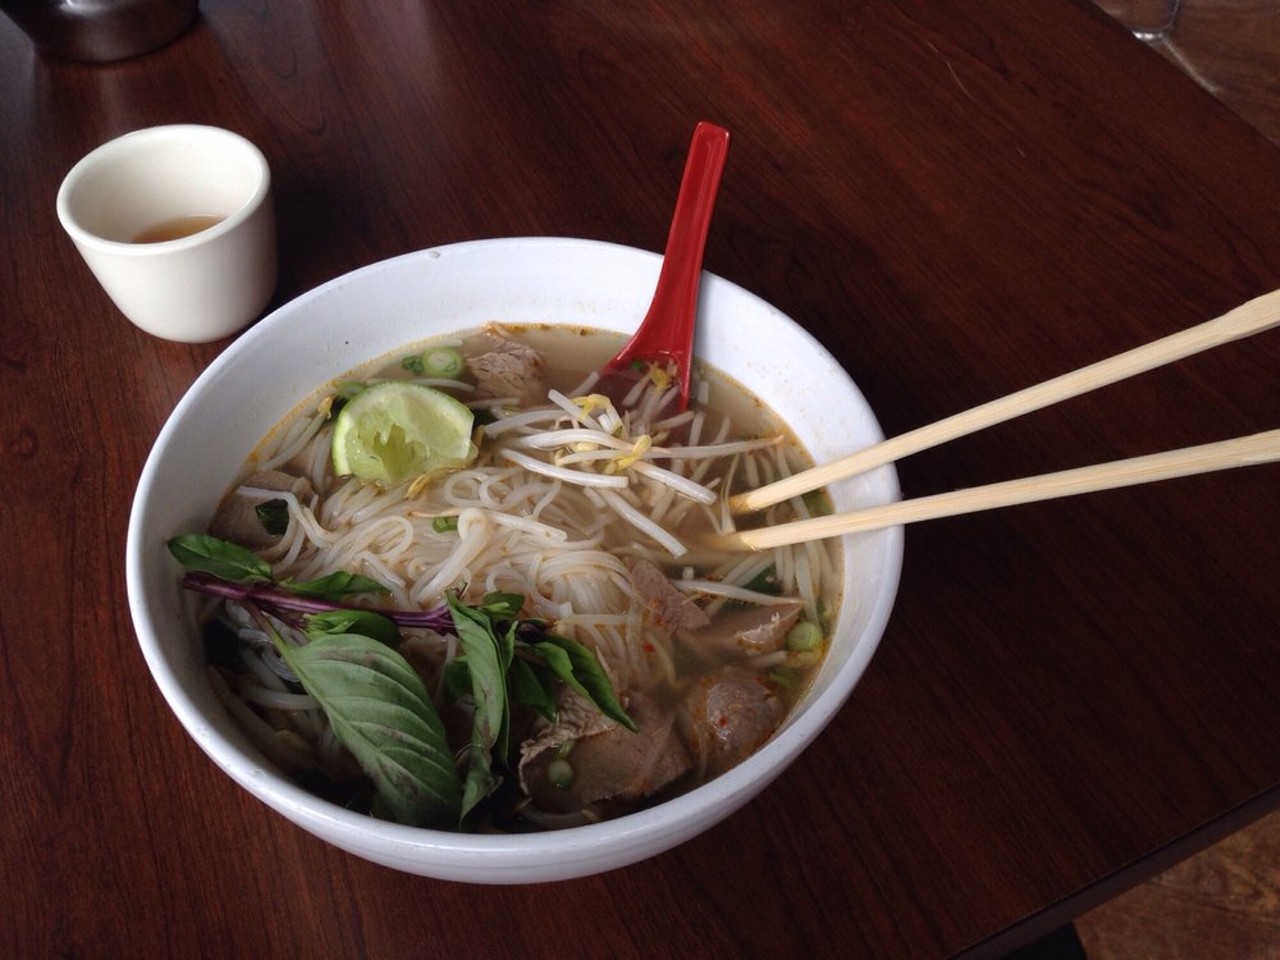 Pho | Pho Lucky  | Regular $9.43 
Detroit | 3111 Woodward Ave. | (313) 338-3895 
Pho is a Vietnamese dish with broth, rice noodles and an assortment of meat and herbs. At Pho Lucky, there are a dozen different pho options to choose from. 
(Photo: Bill W., via Yelp)